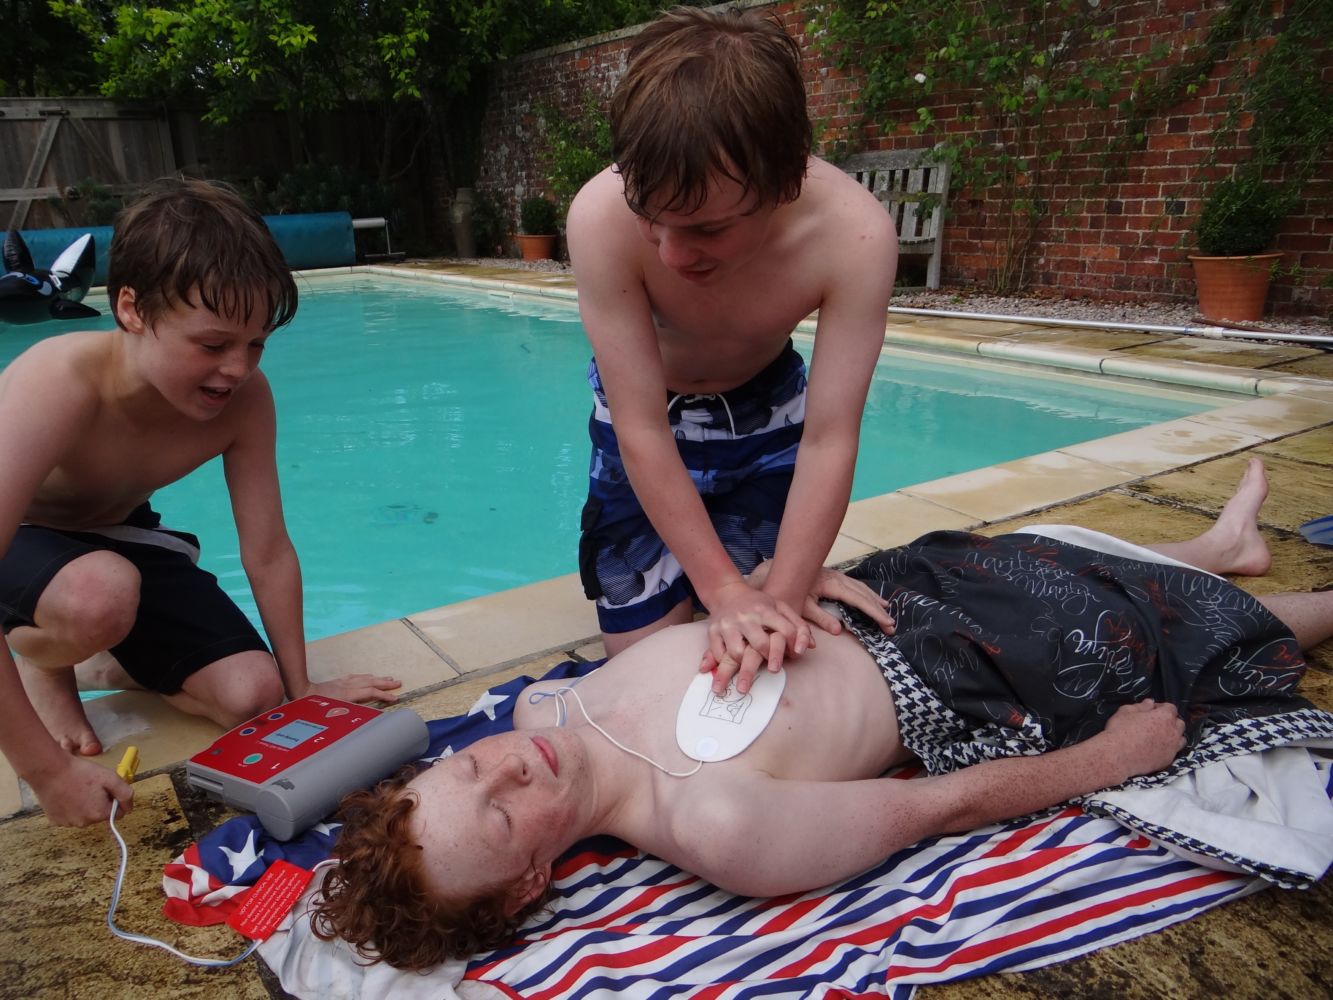 drowning person first aid